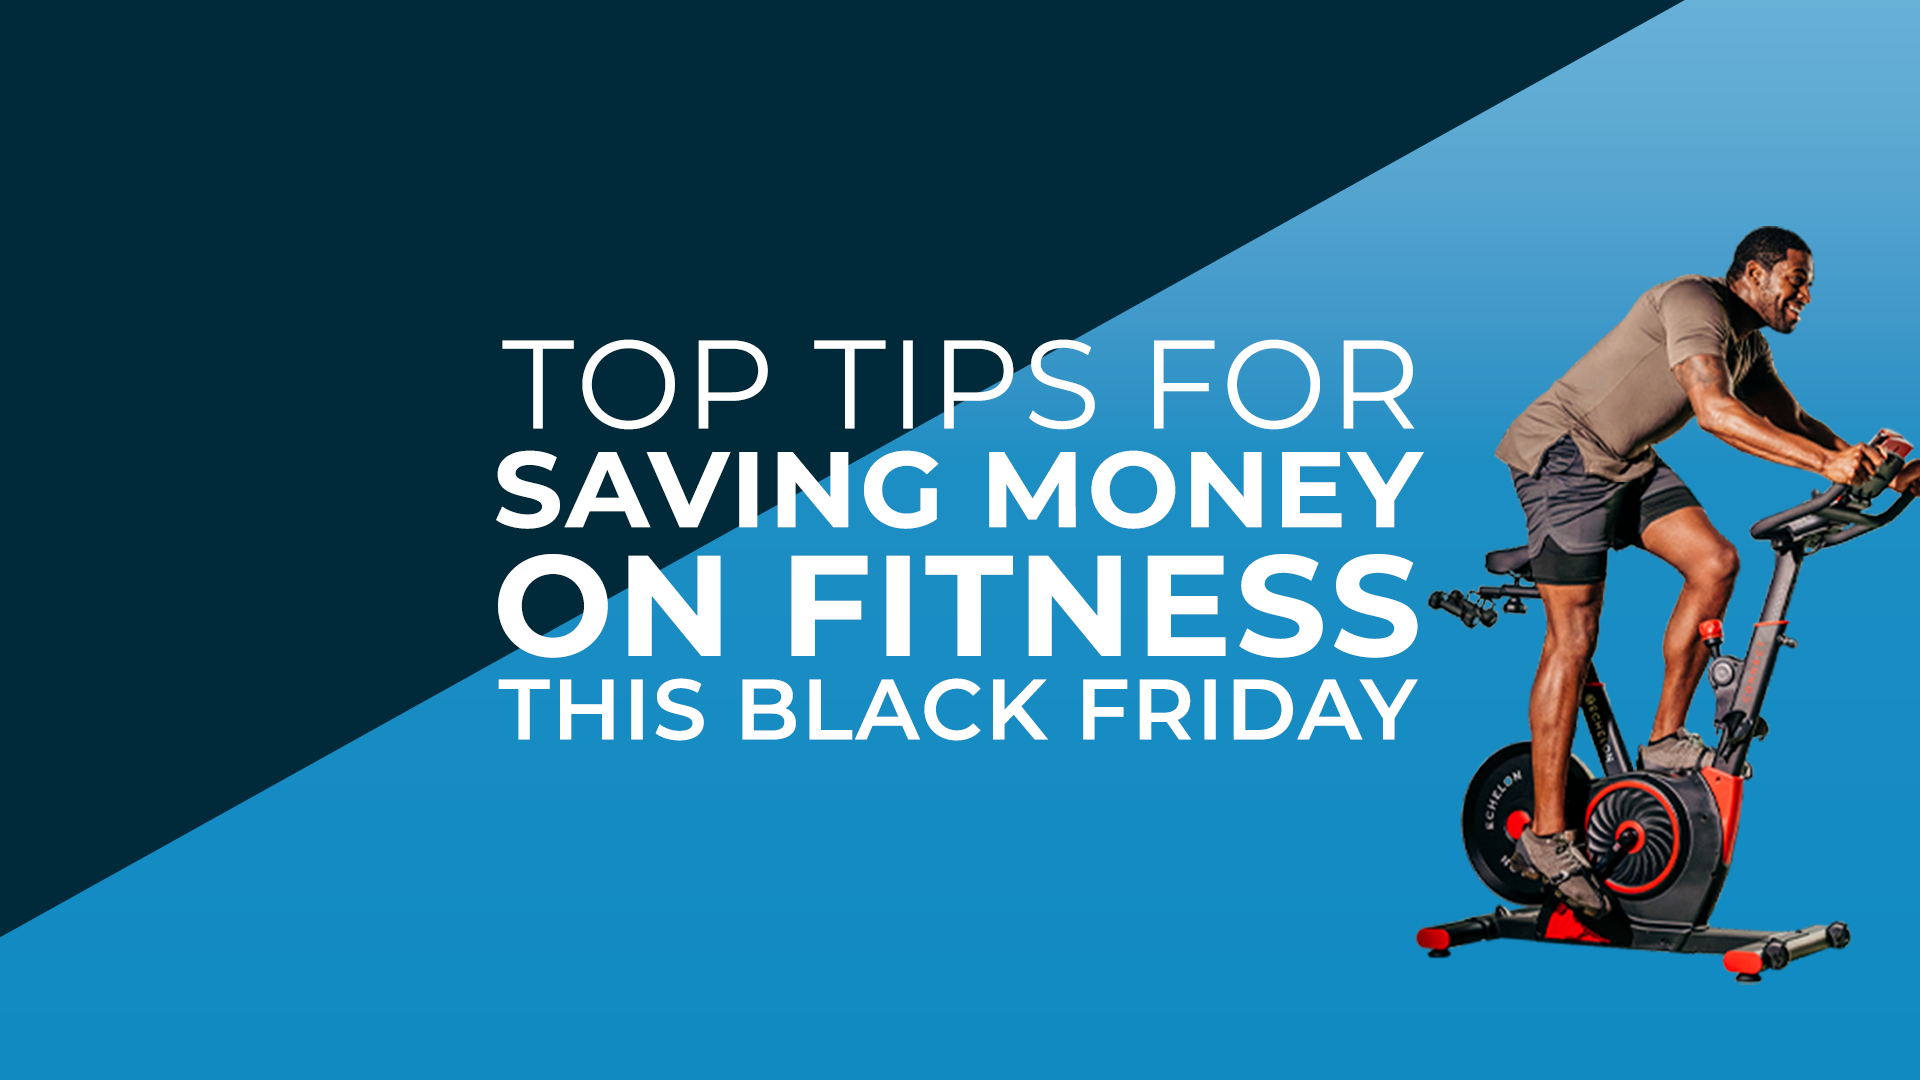 Top Tips for Saving Money on Fitness This Black Friday